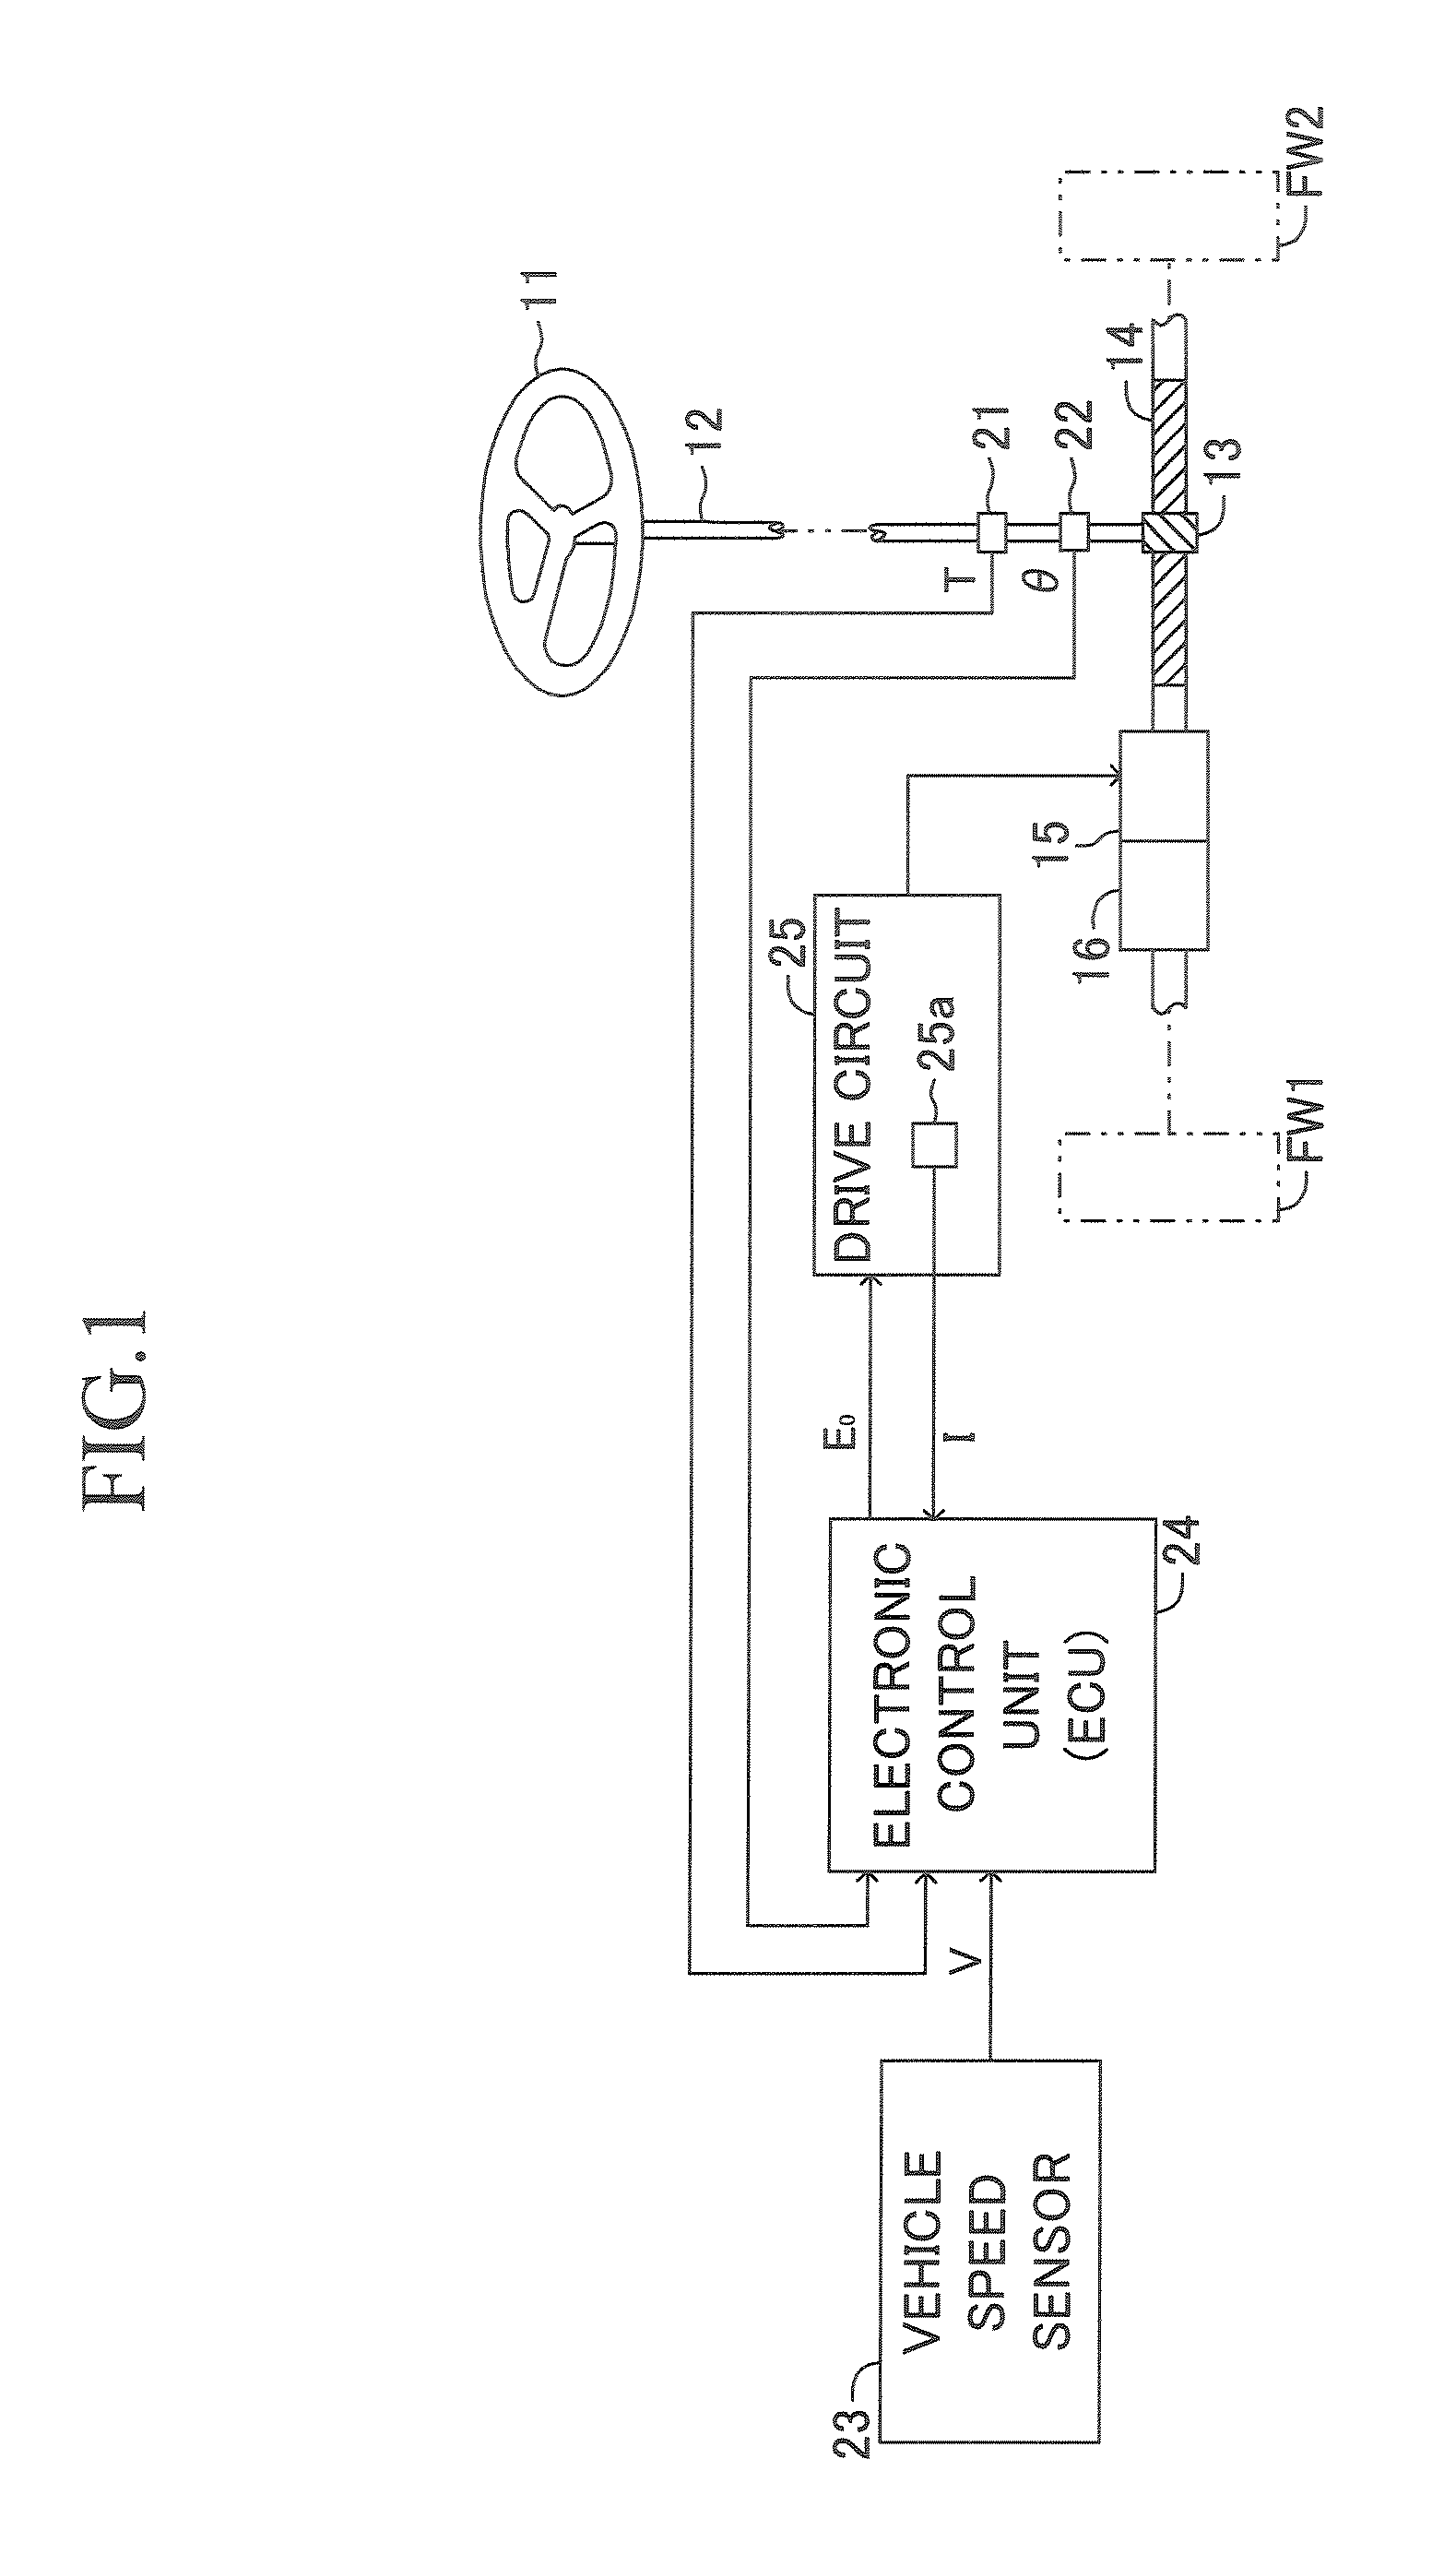 Steering assistance device for vehicle